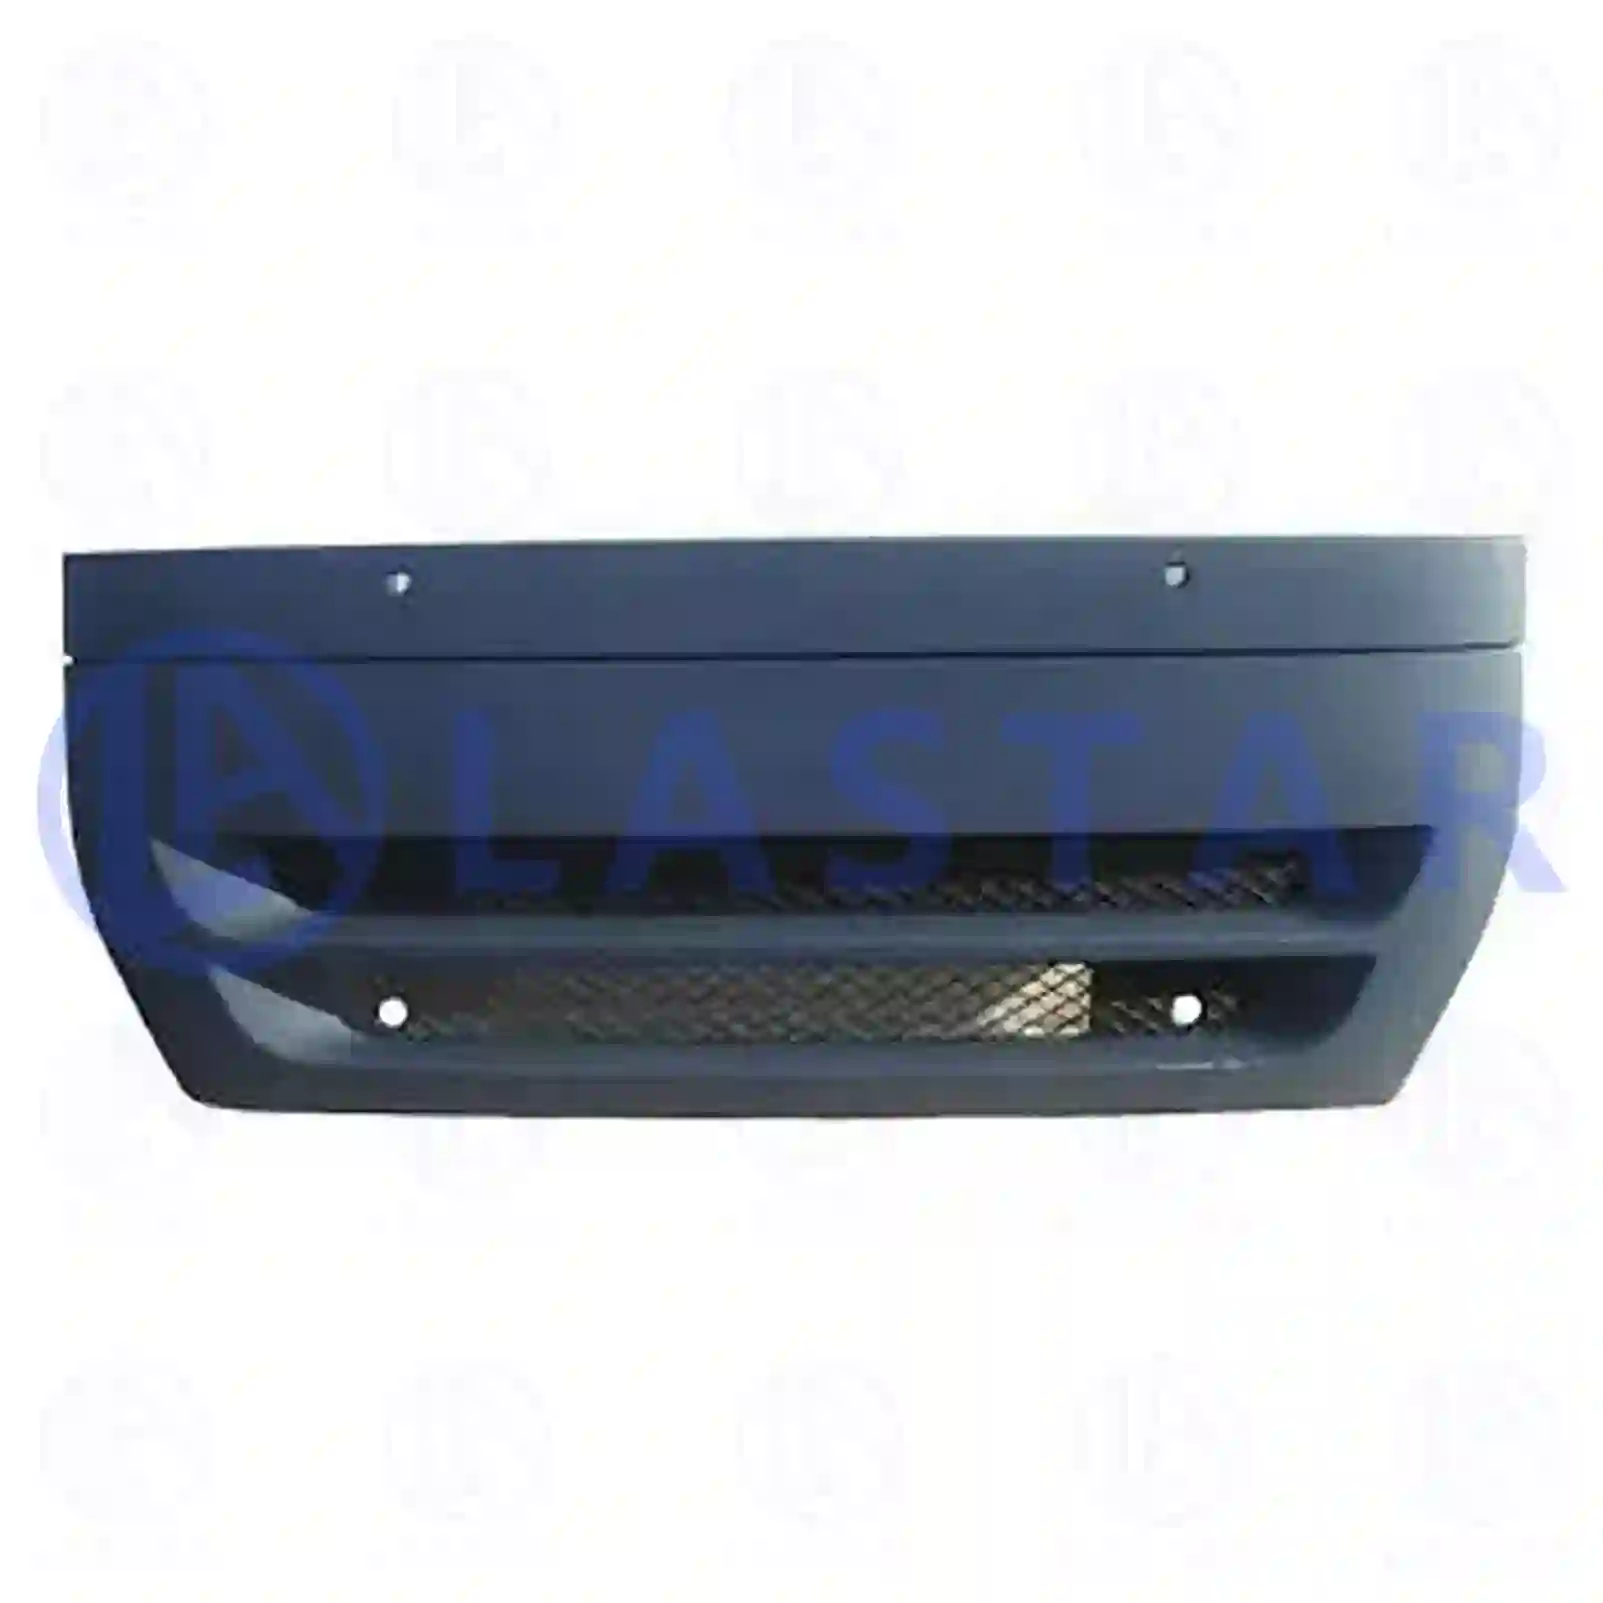 Front grill, 77720702, 504170777, 50417 ||  77720702 Lastar Spare Part | Truck Spare Parts, Auotomotive Spare Parts Front grill, 77720702, 504170777, 50417 ||  77720702 Lastar Spare Part | Truck Spare Parts, Auotomotive Spare Parts